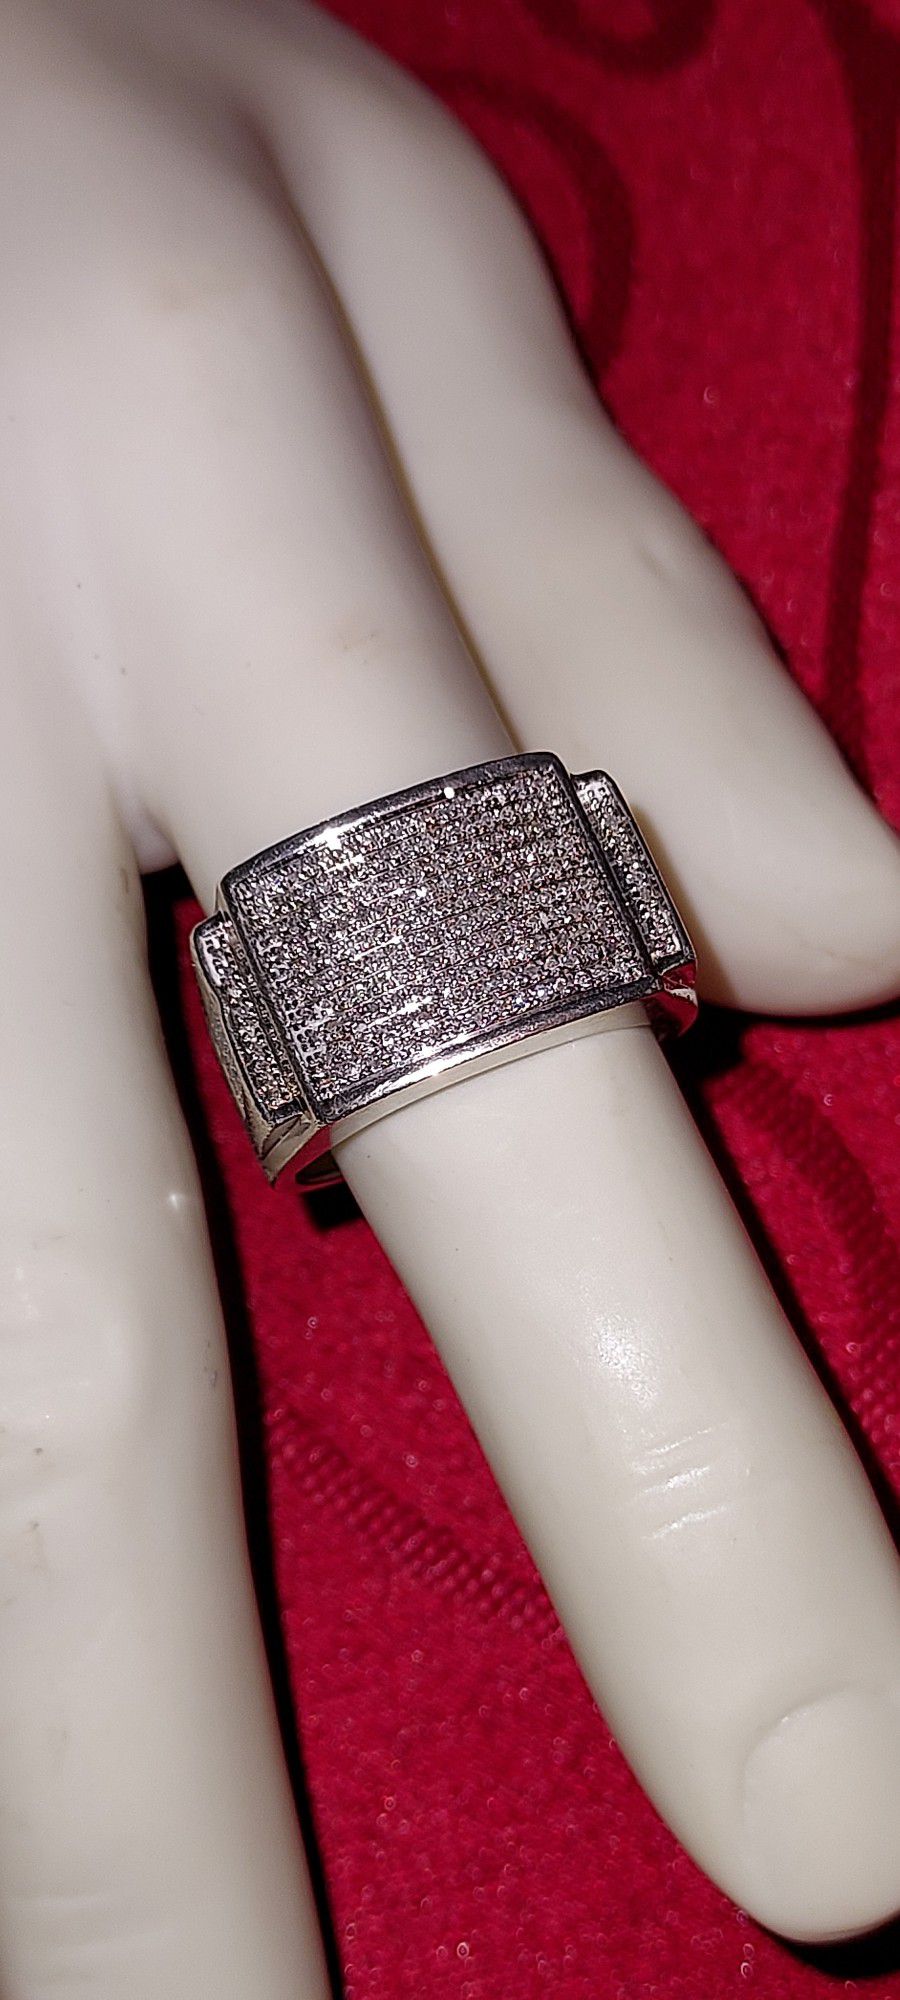 Men's 925 Sterling Pave Diamond Cluster Ring 9.8G Size 10.75 (PENDING SALE)